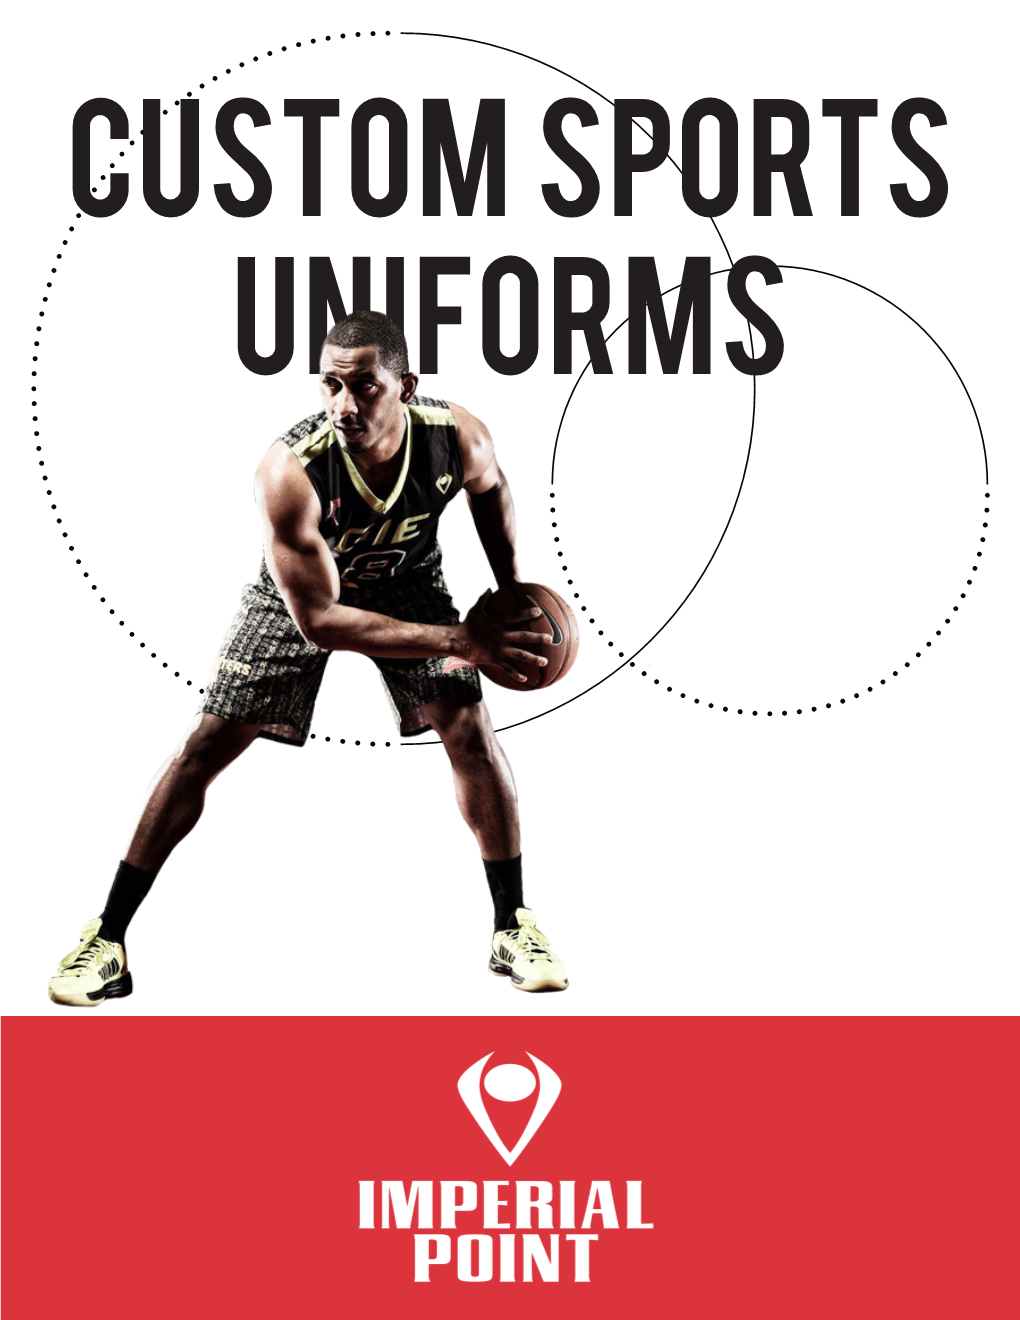 Custom Basketball Uniforms Things Heat up Quickly on the Court, So It’S Important to Find a Comfortable Basketball Uniform Which Will Stay Cool and Dry No Matter What